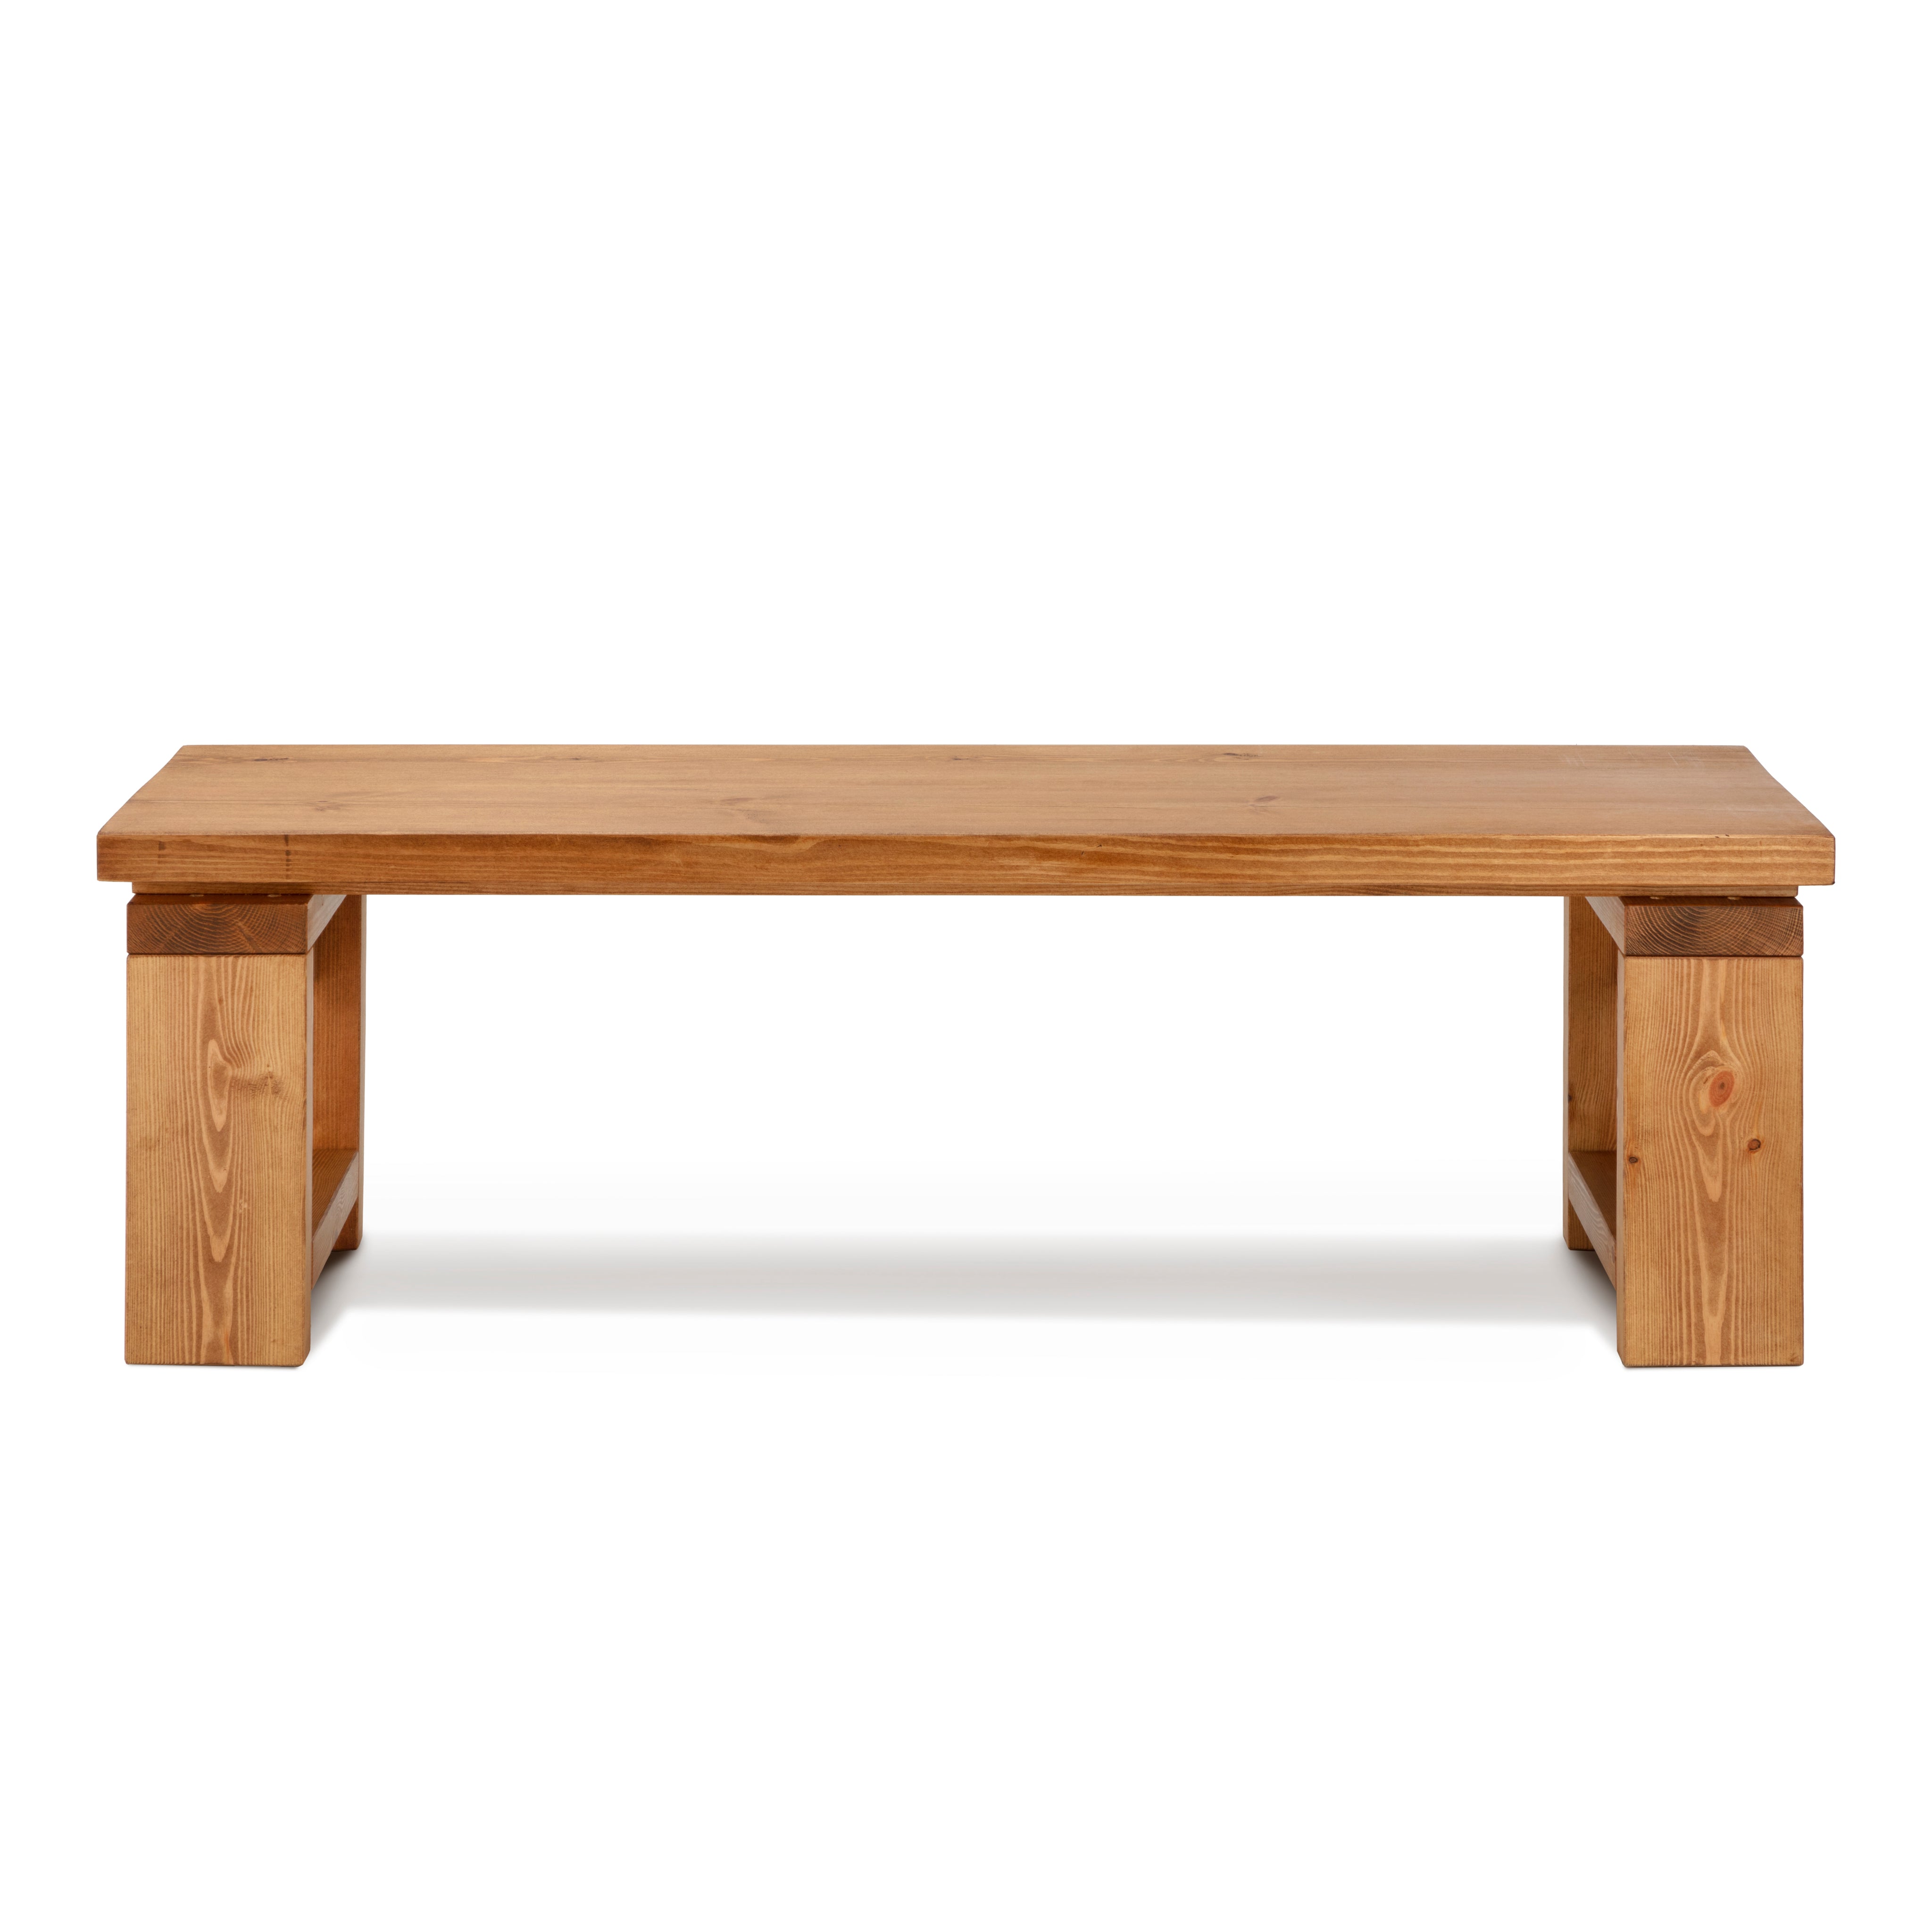 Sandyford Dining Table And Benches